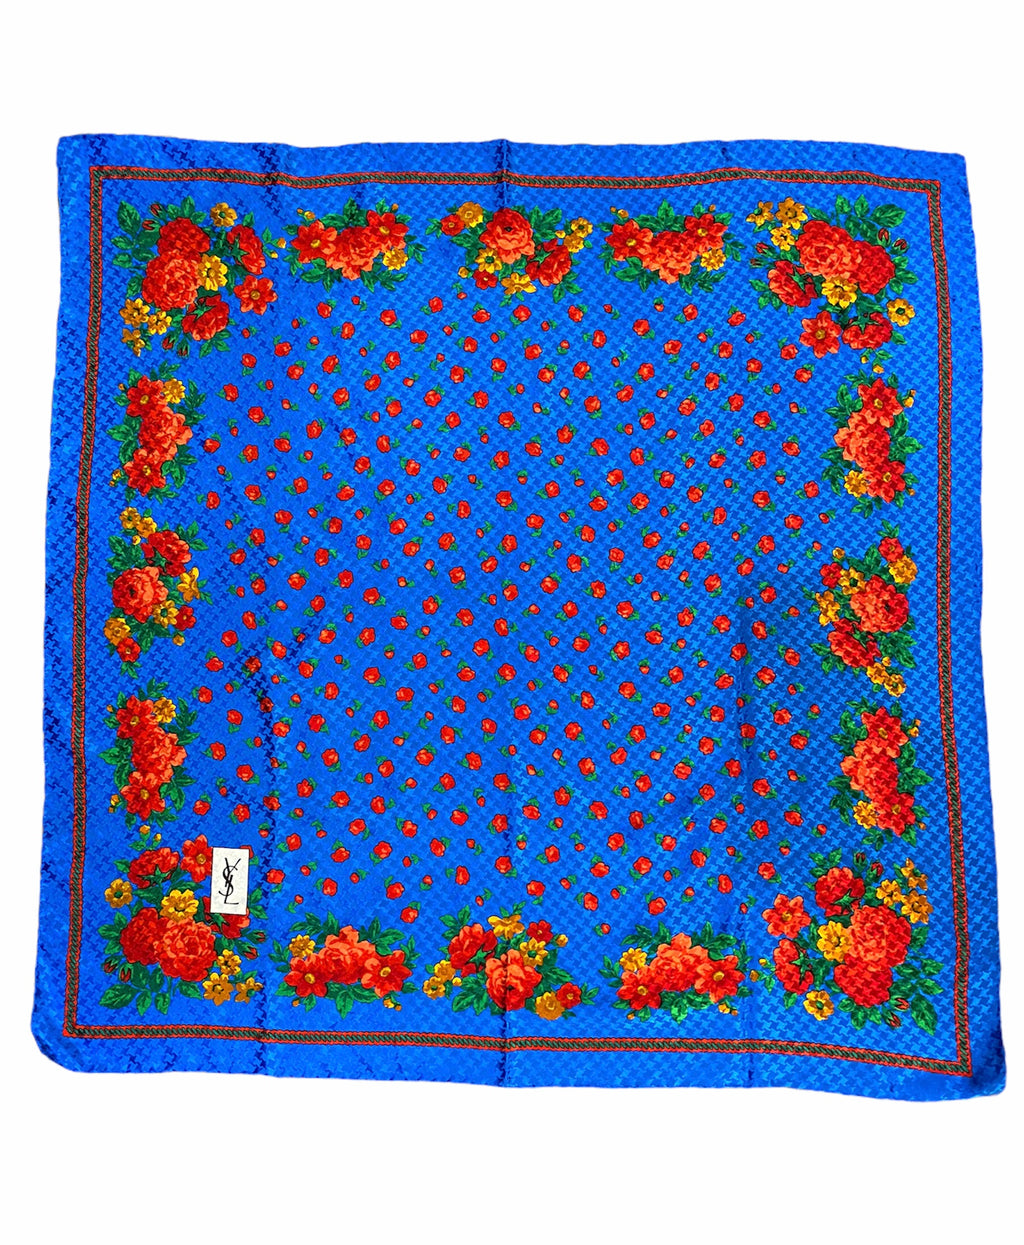 YSL 70s Bright Blue Polka Dot Floral Silk Scarf WHOLE 1 of 3